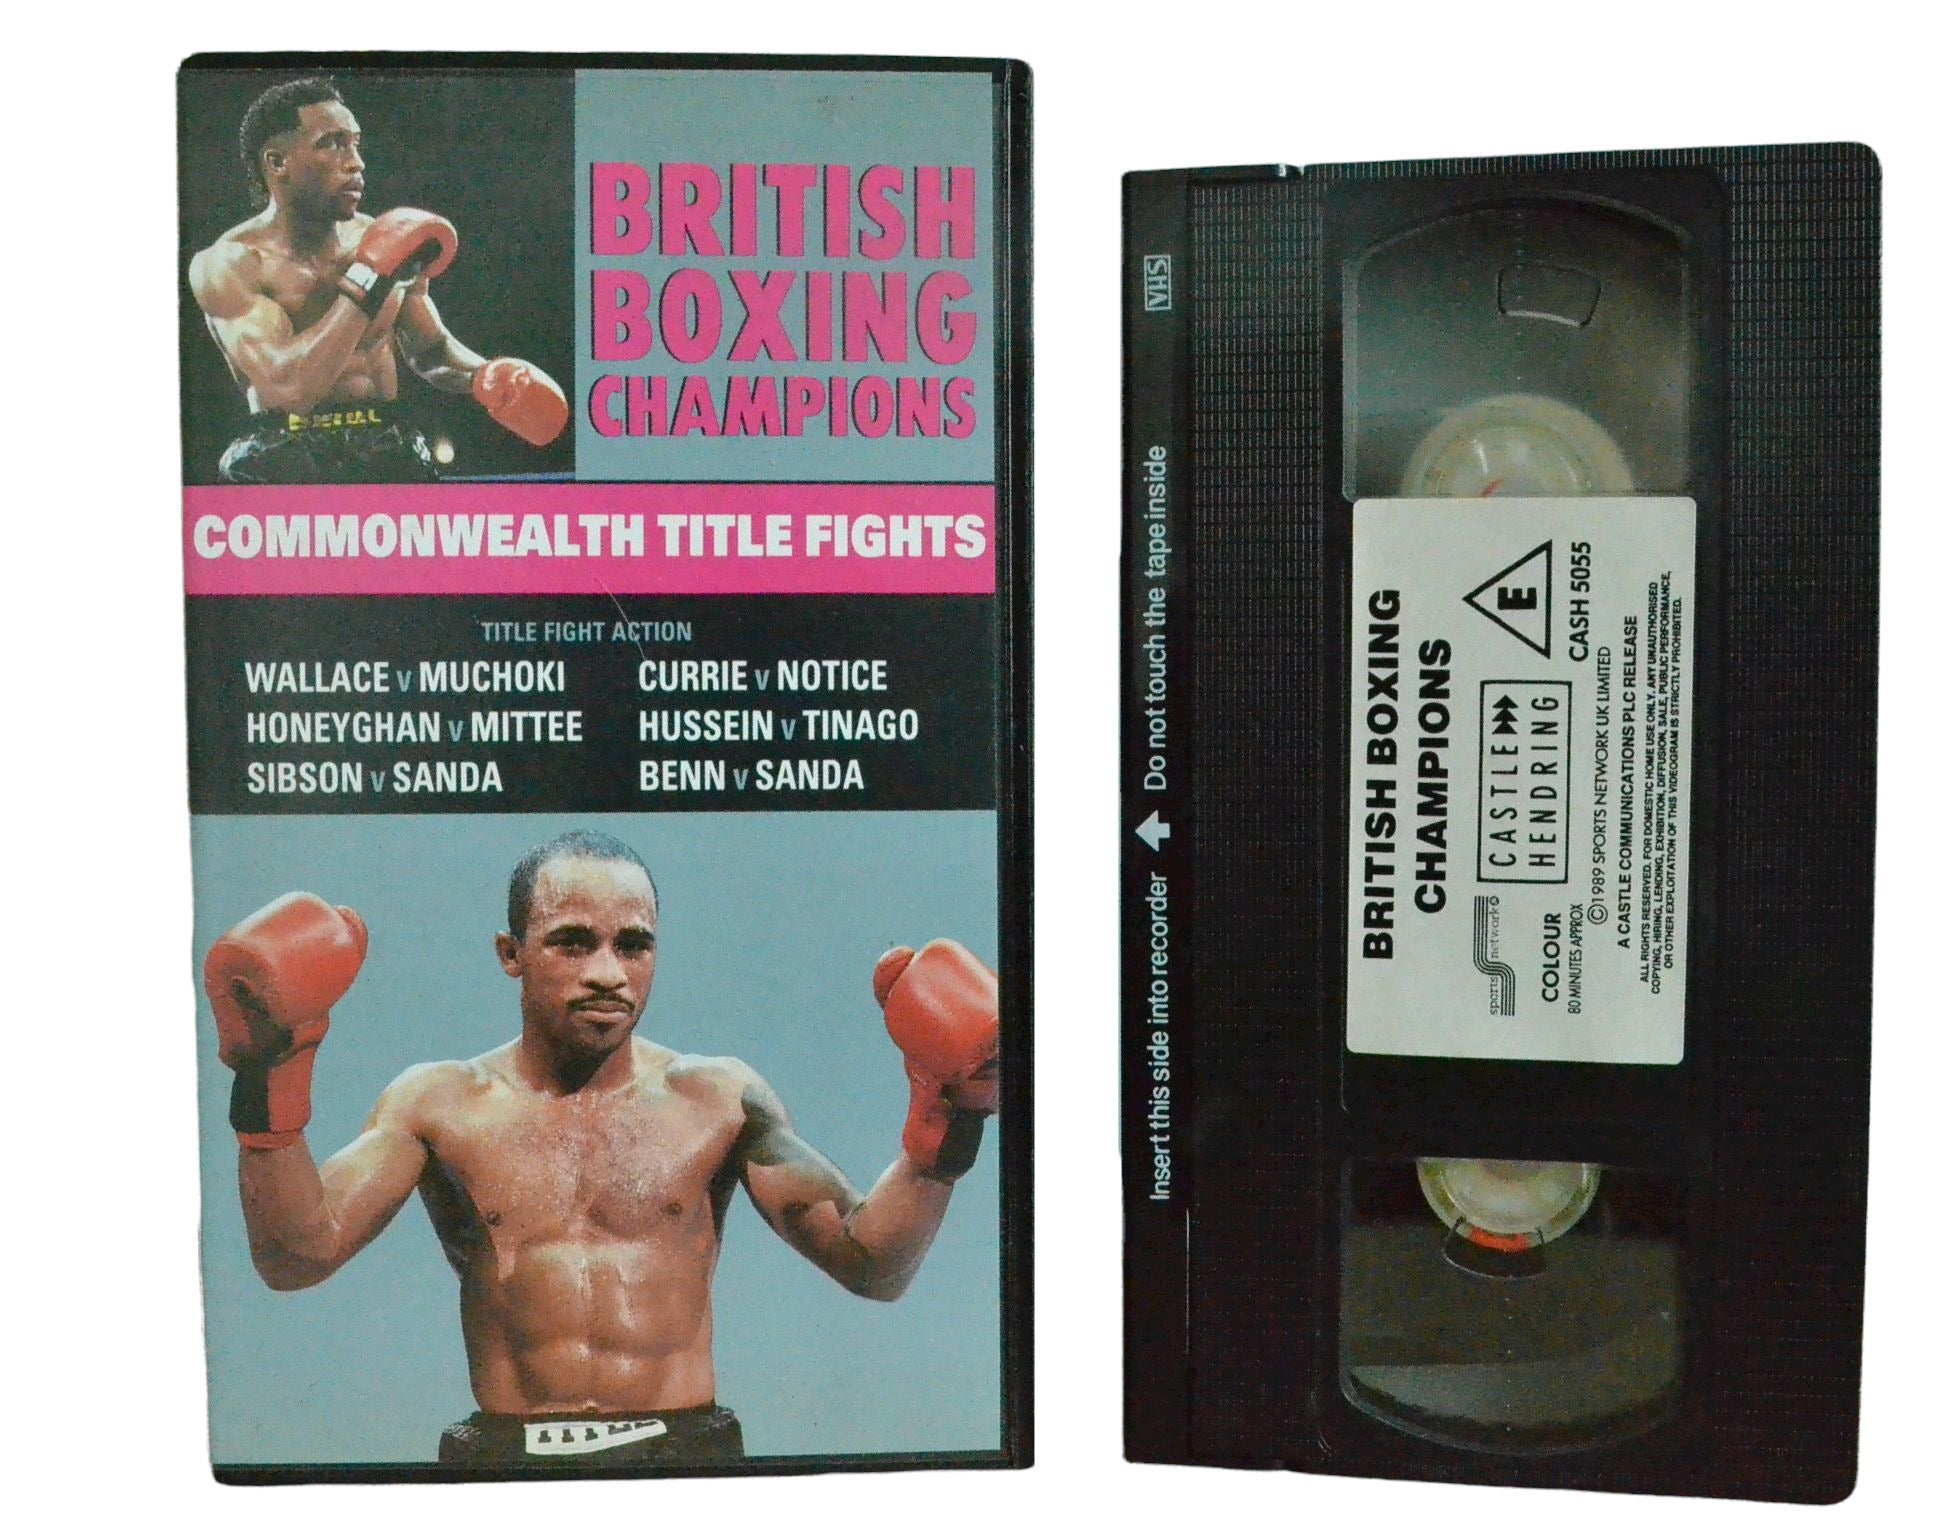 British Boxing Champions - Commonwealth Title Fights - Keith Wallace - Castle Hendring - Boxing - Pal VHS-